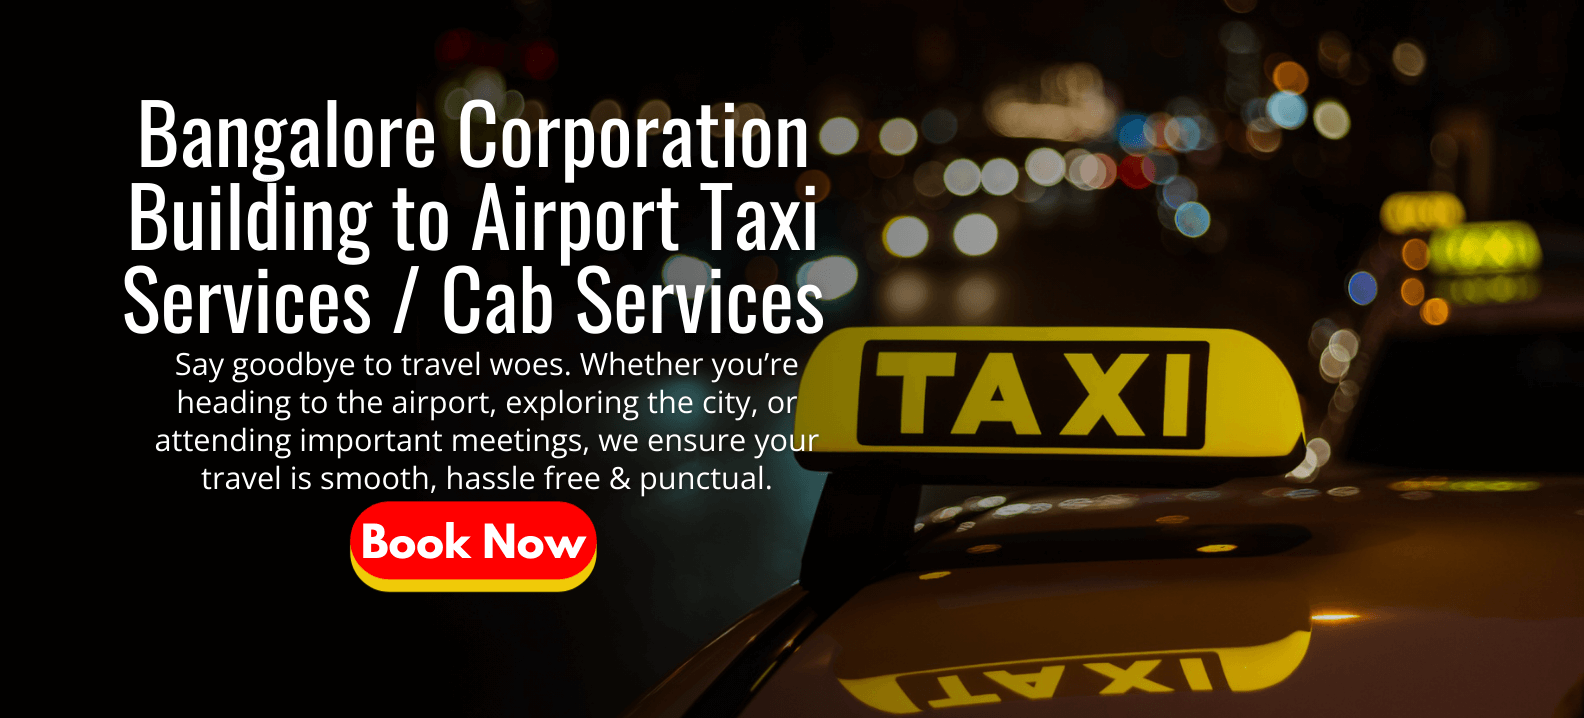 Bangalore Corporation Building to Airport Taxi Services _ Cab Services